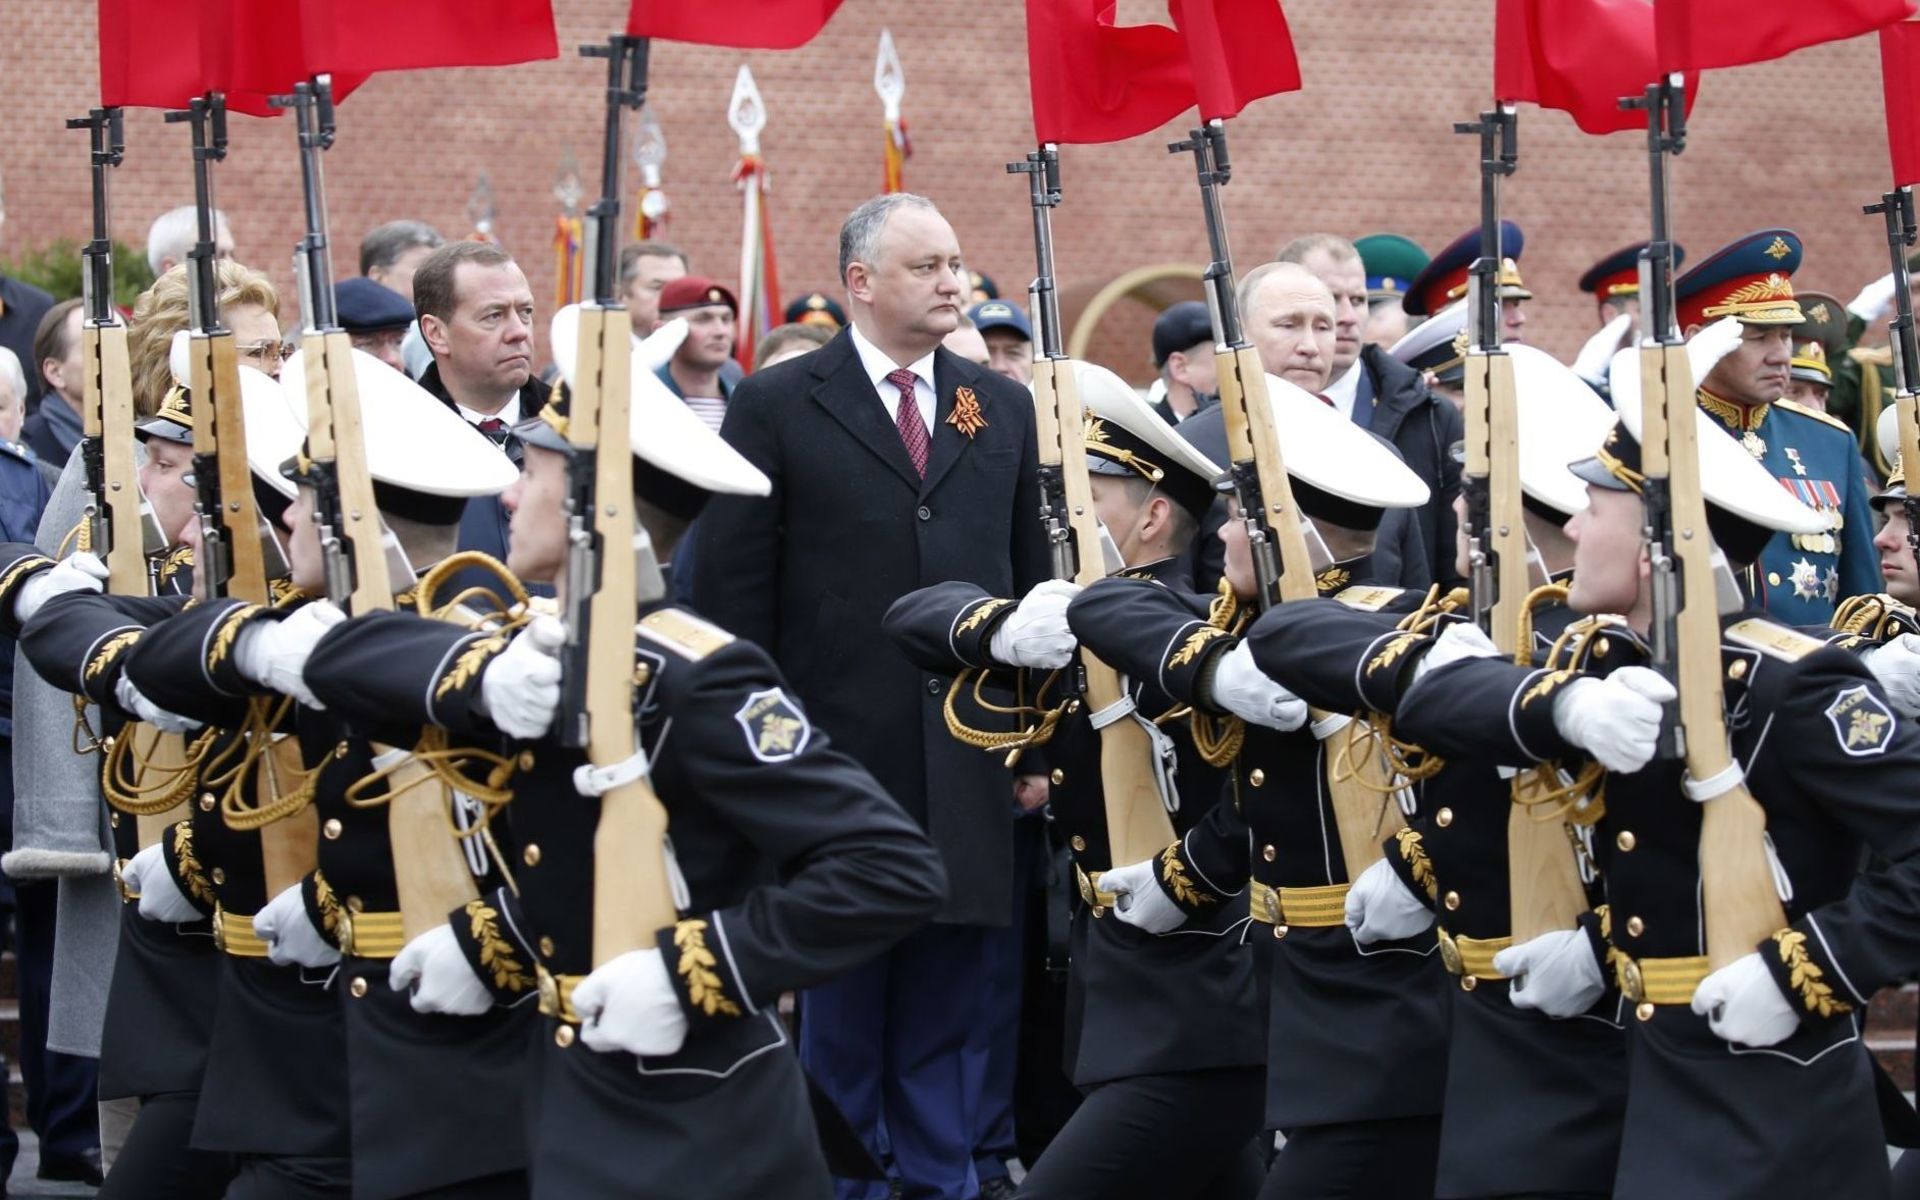 Moldova's Igor Dodon was the only head of foreign state who attended the 2017 Victory Day parade in Moscow (Image: novayagazeta.ru)